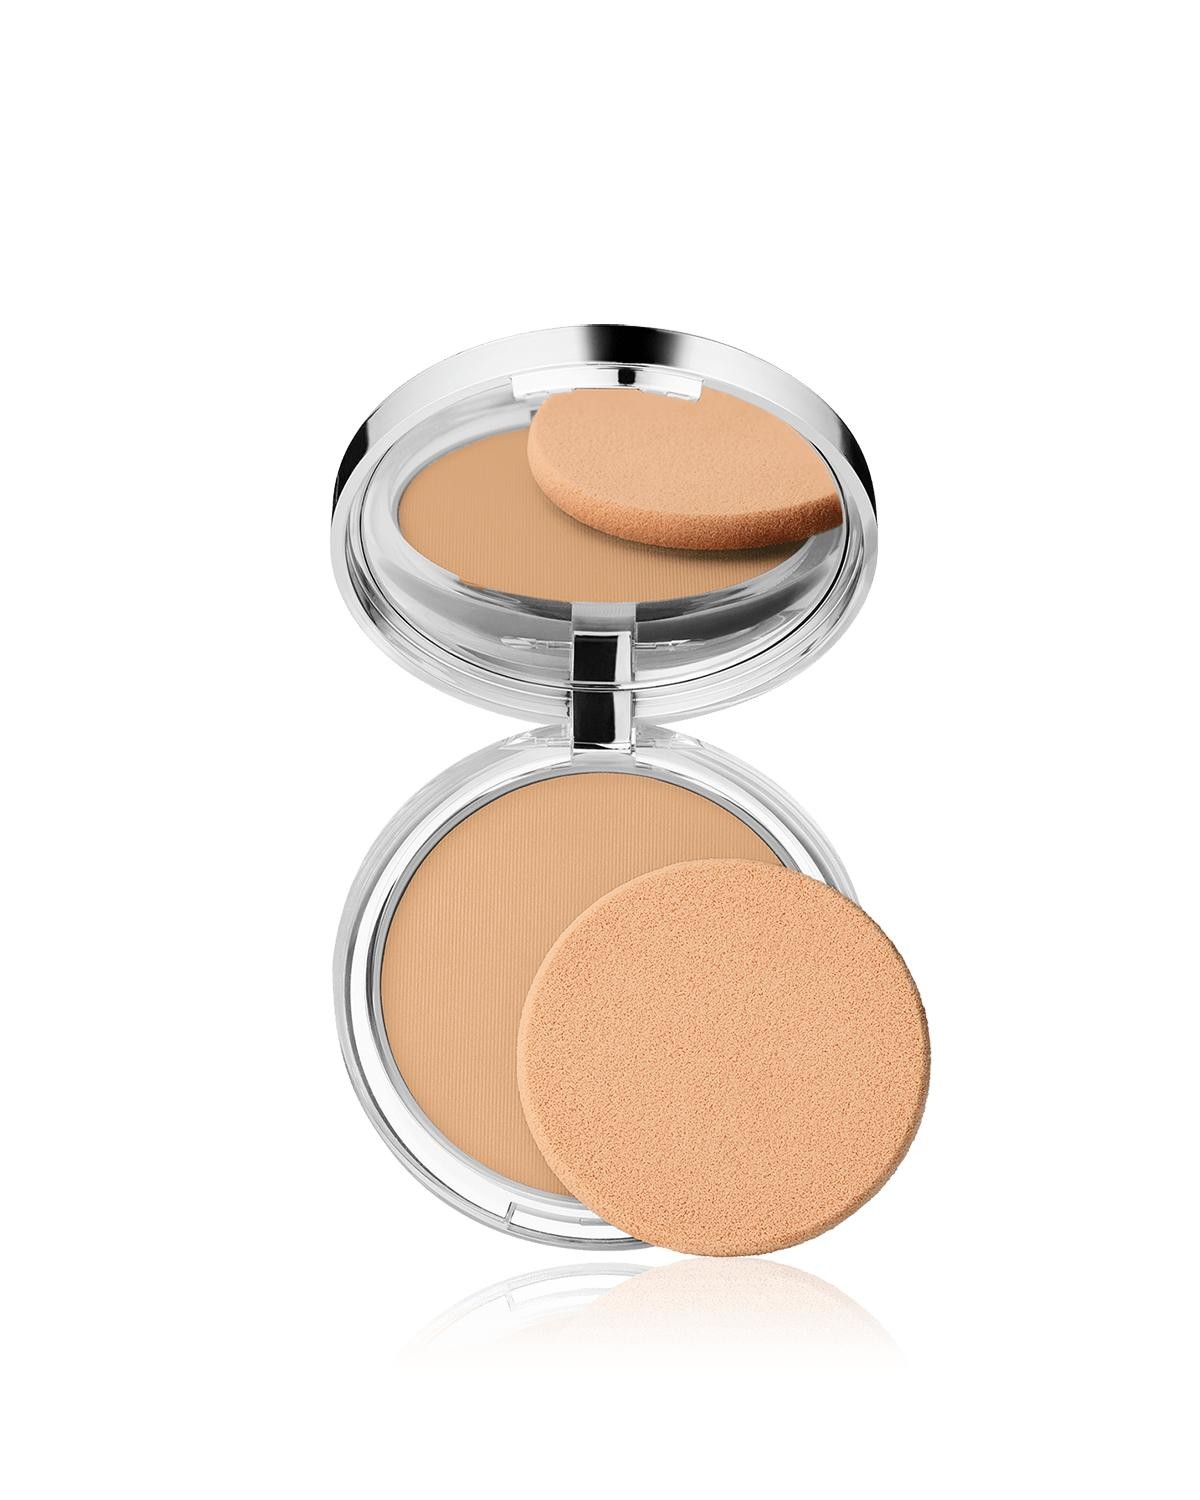 Clinique Stay-Matte Sheer Pressed Powder 04 Stay Honey, 7g